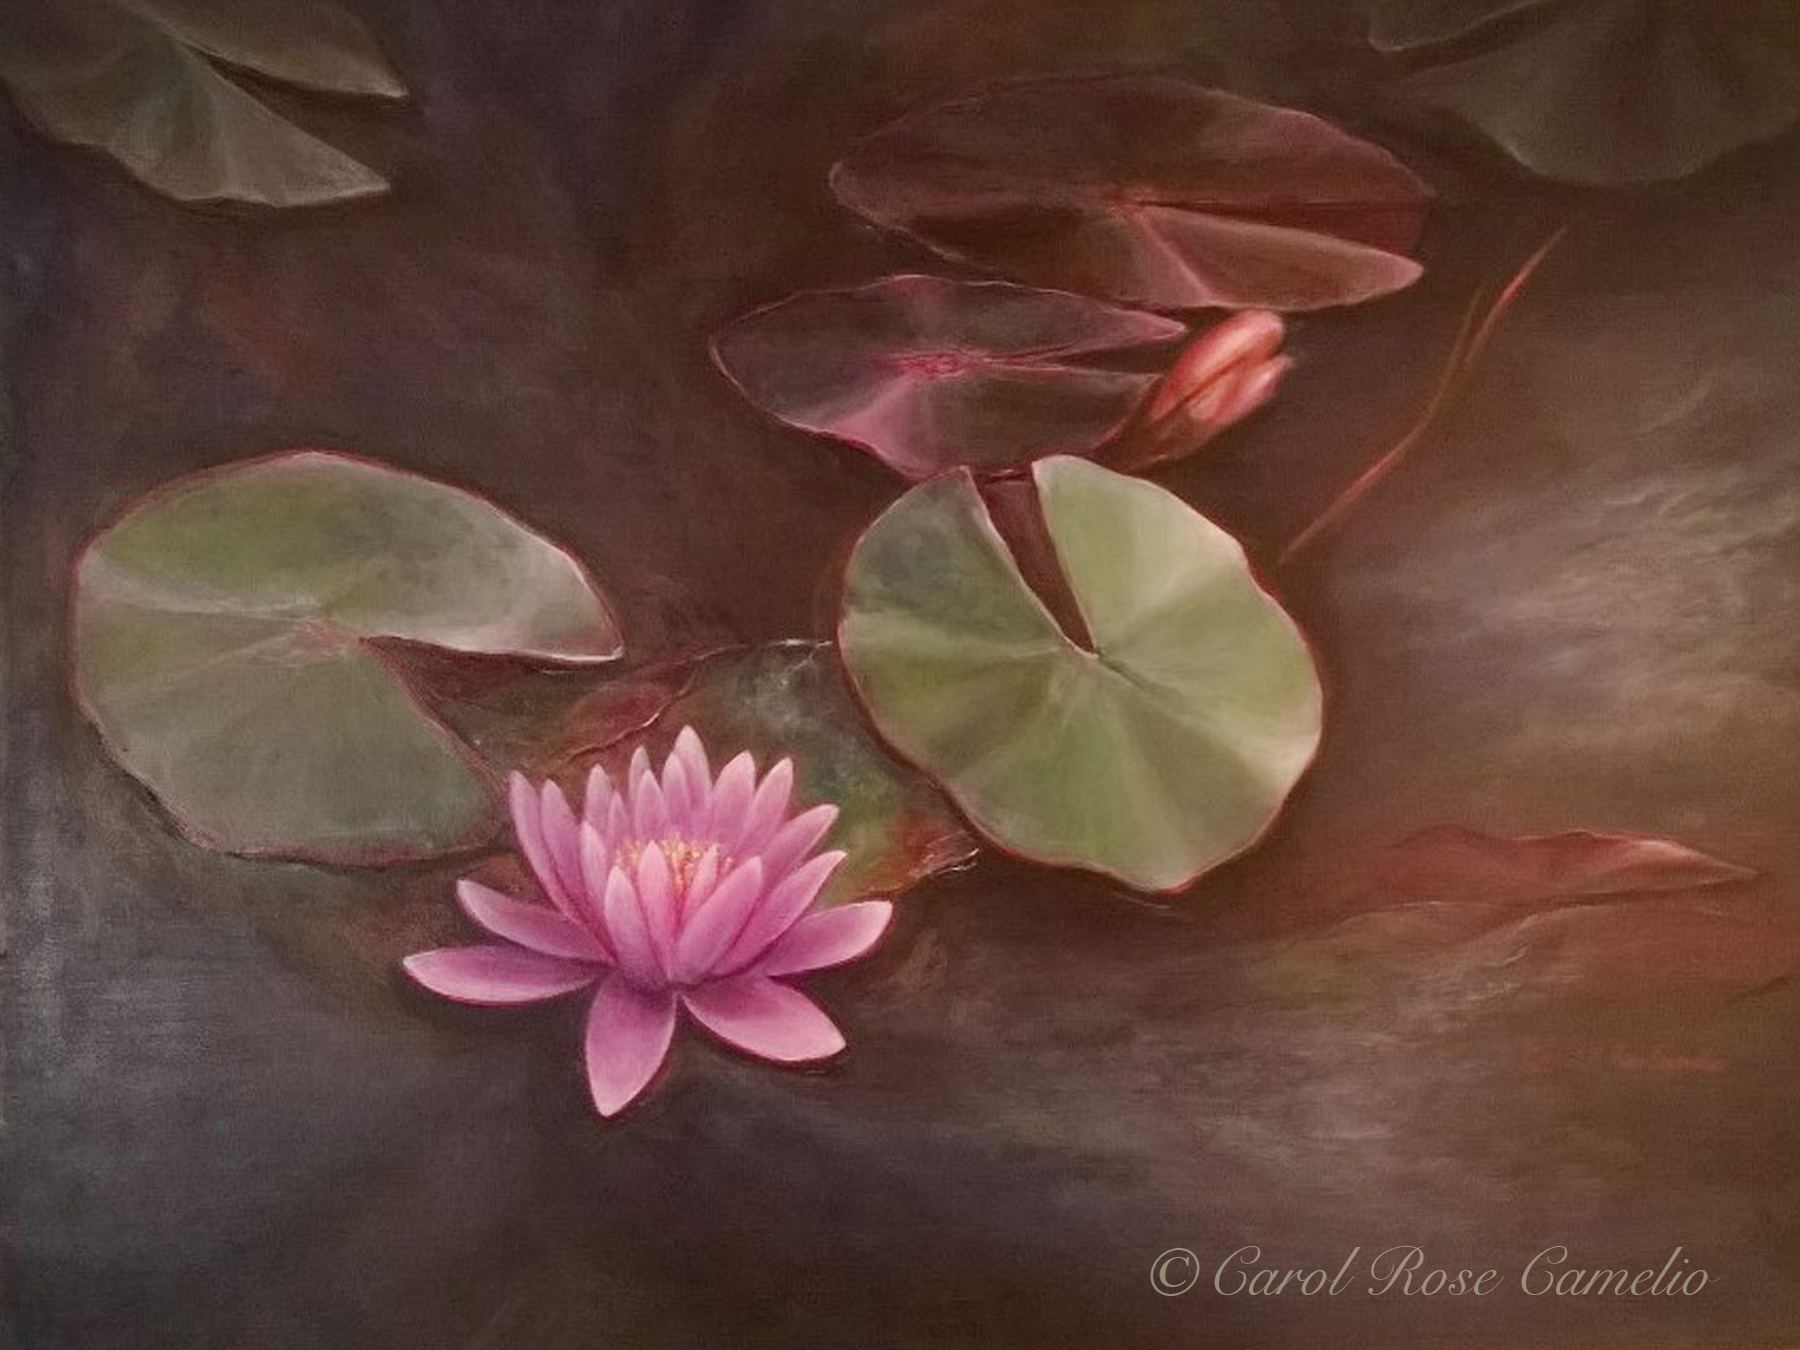 Lily Pond: A pink tint colors several lilypads and a water lily on the surface of a pond.